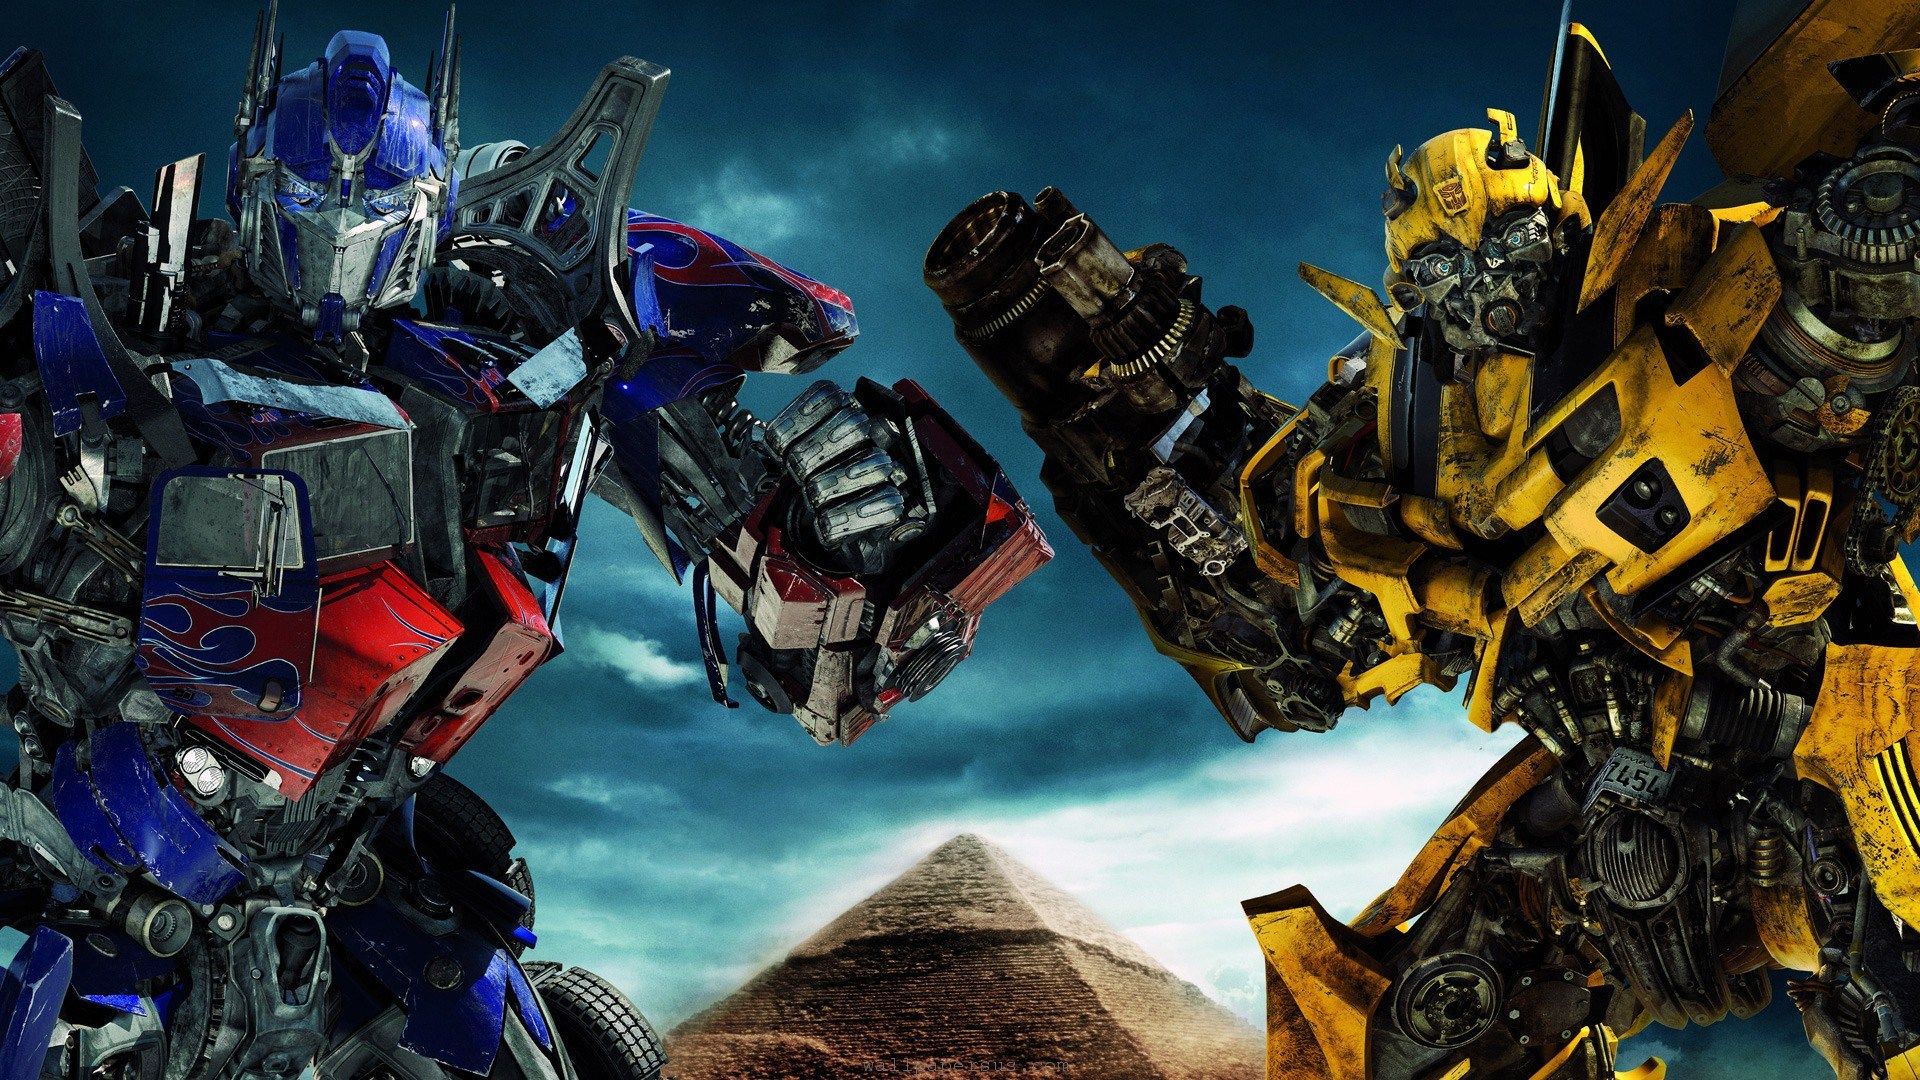 Transformers Wallpaper For Desktop Background Movies Casts In